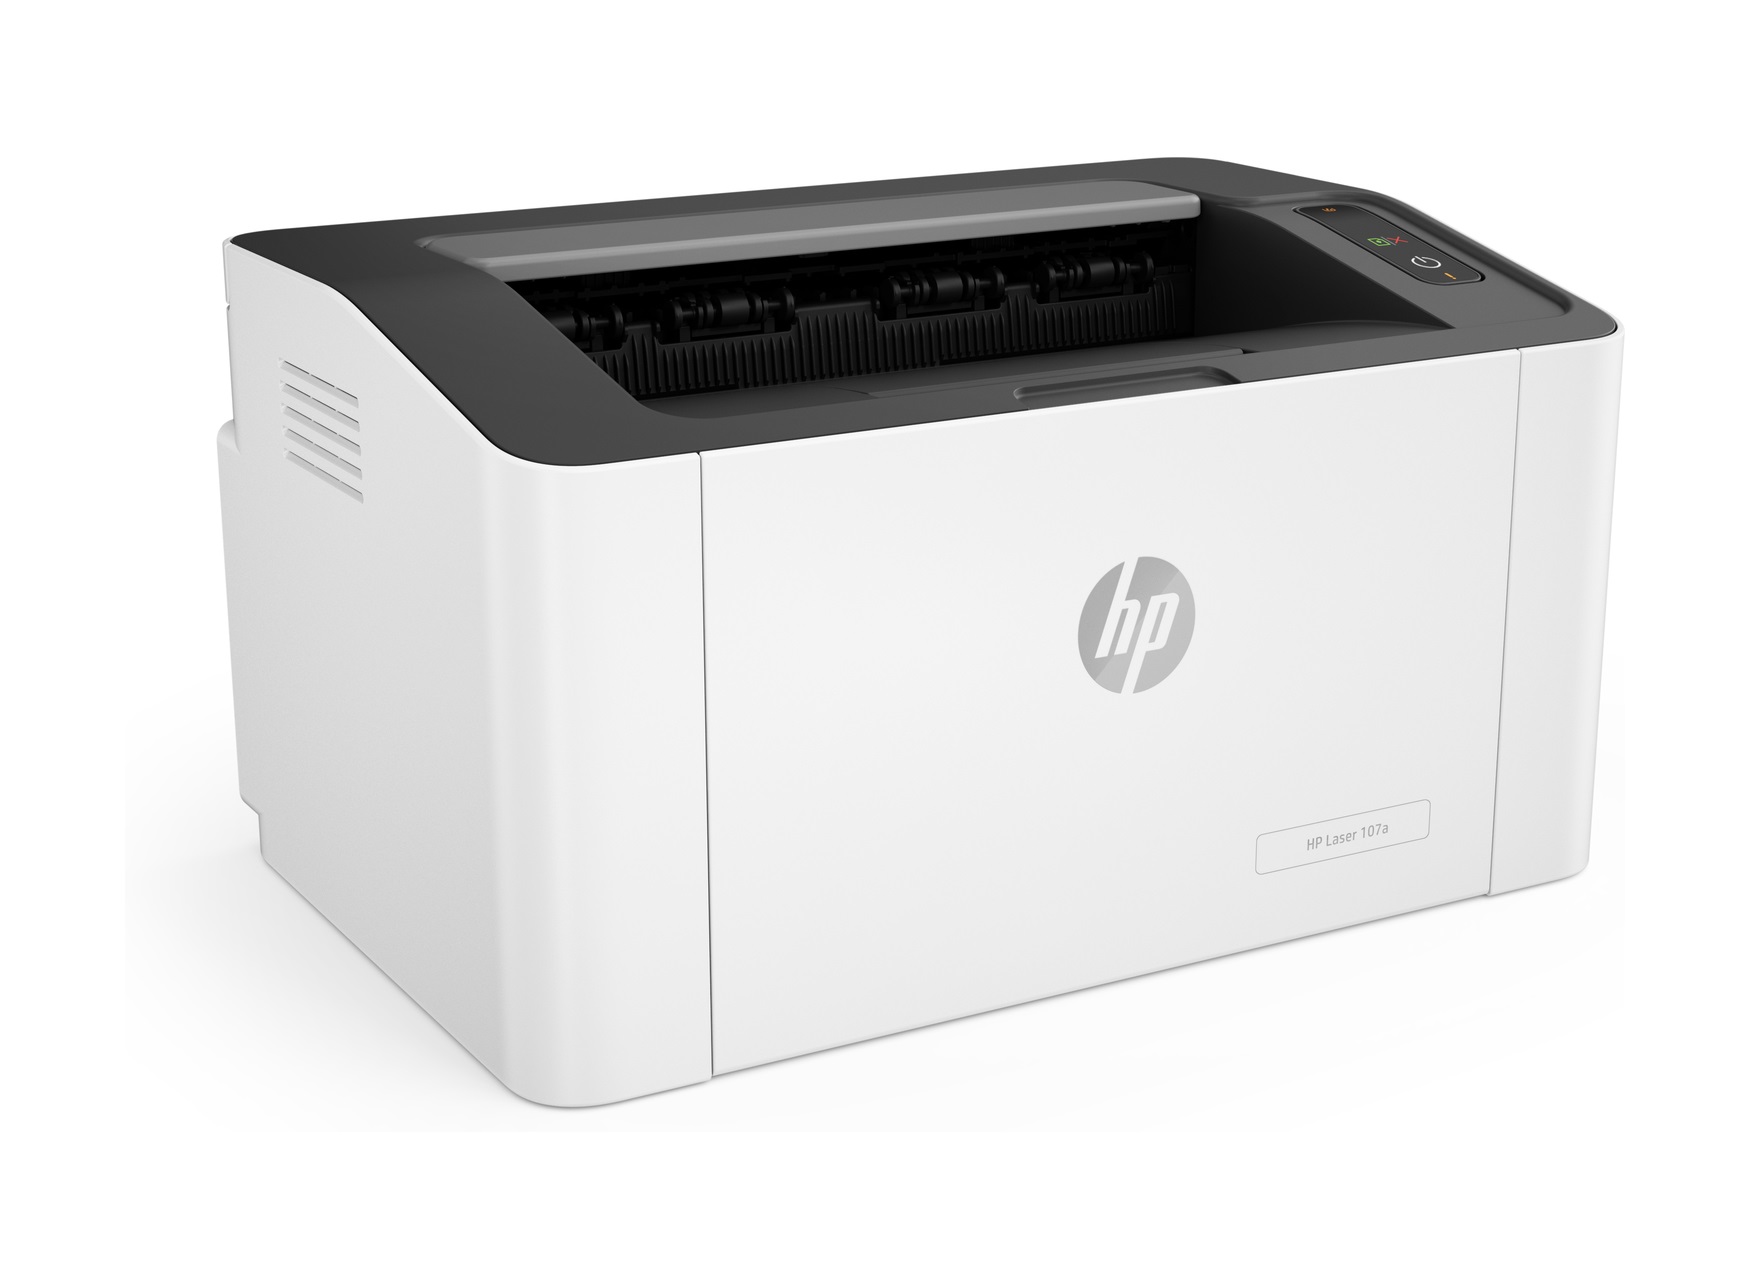 How to Install HP Laser 107w/107a Printer in Debian Bookworm